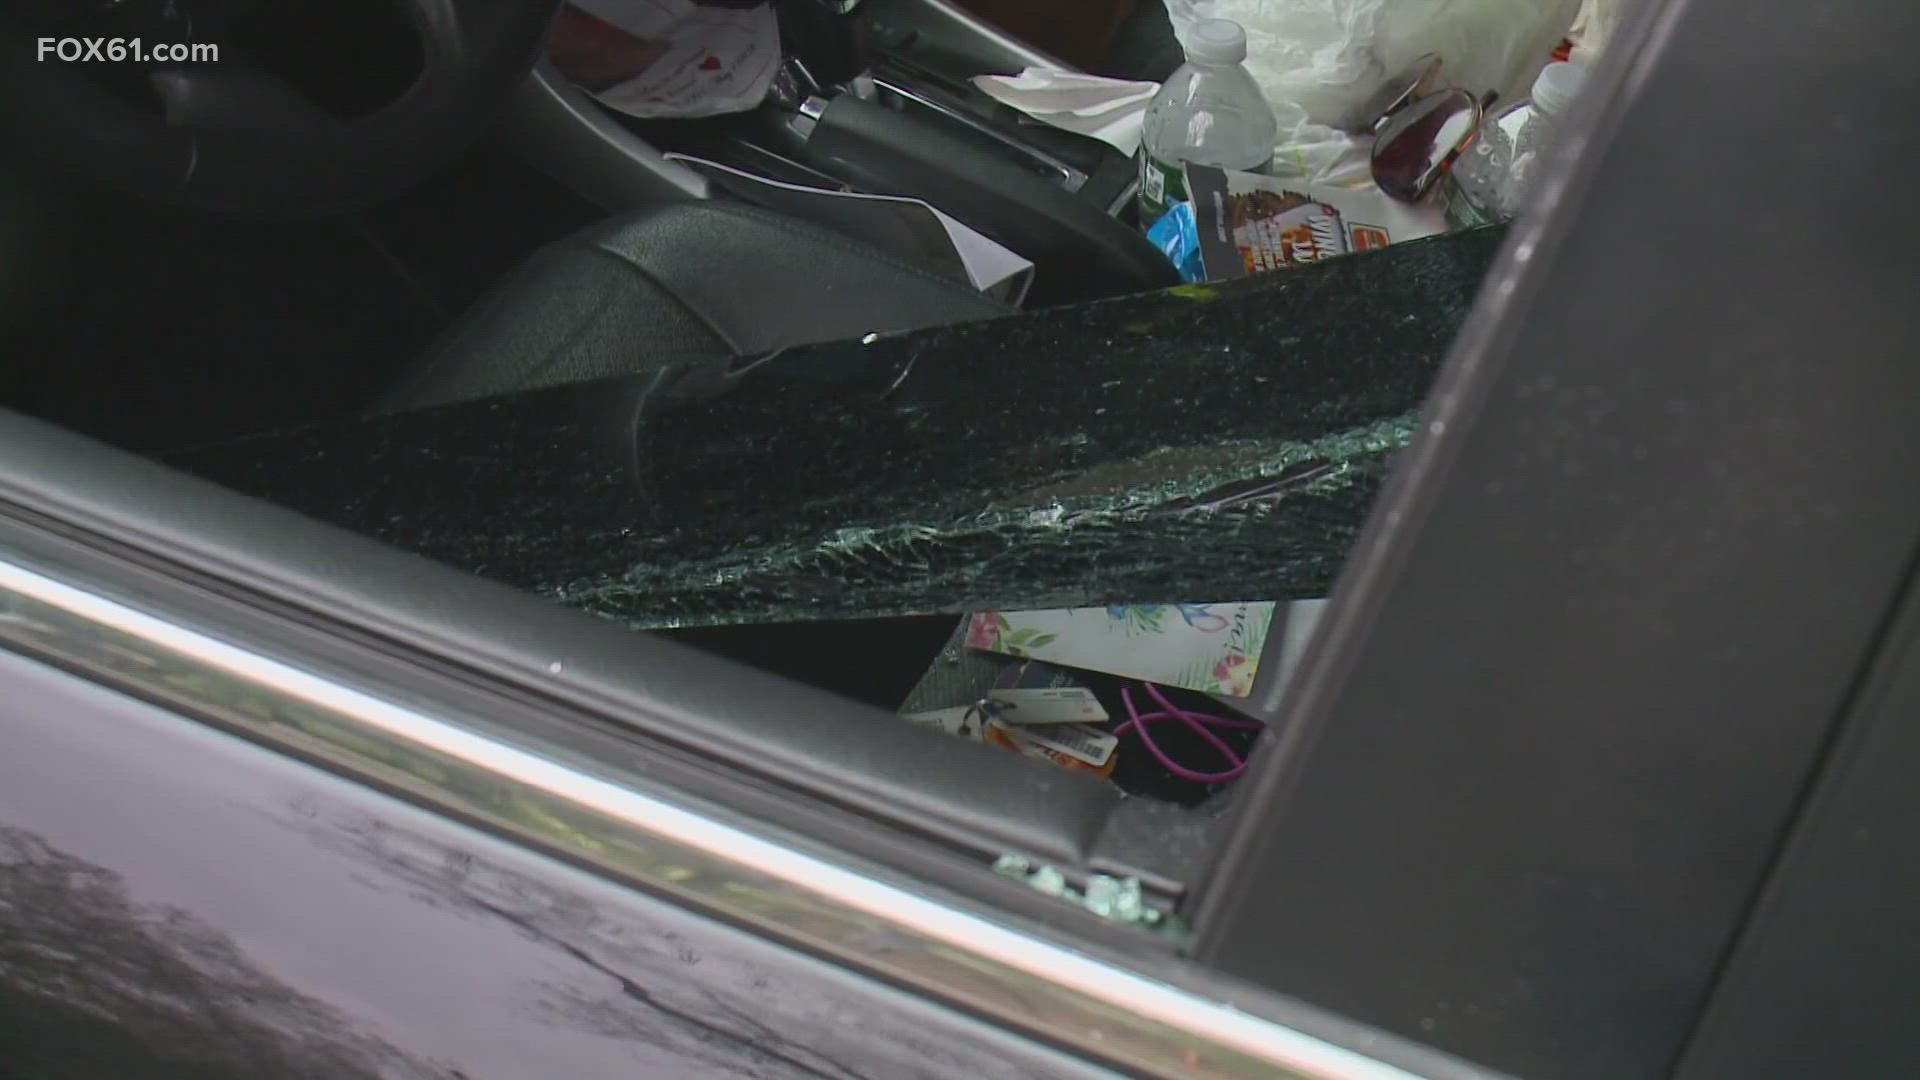 At least 10 cars were broken into on Mother's Day